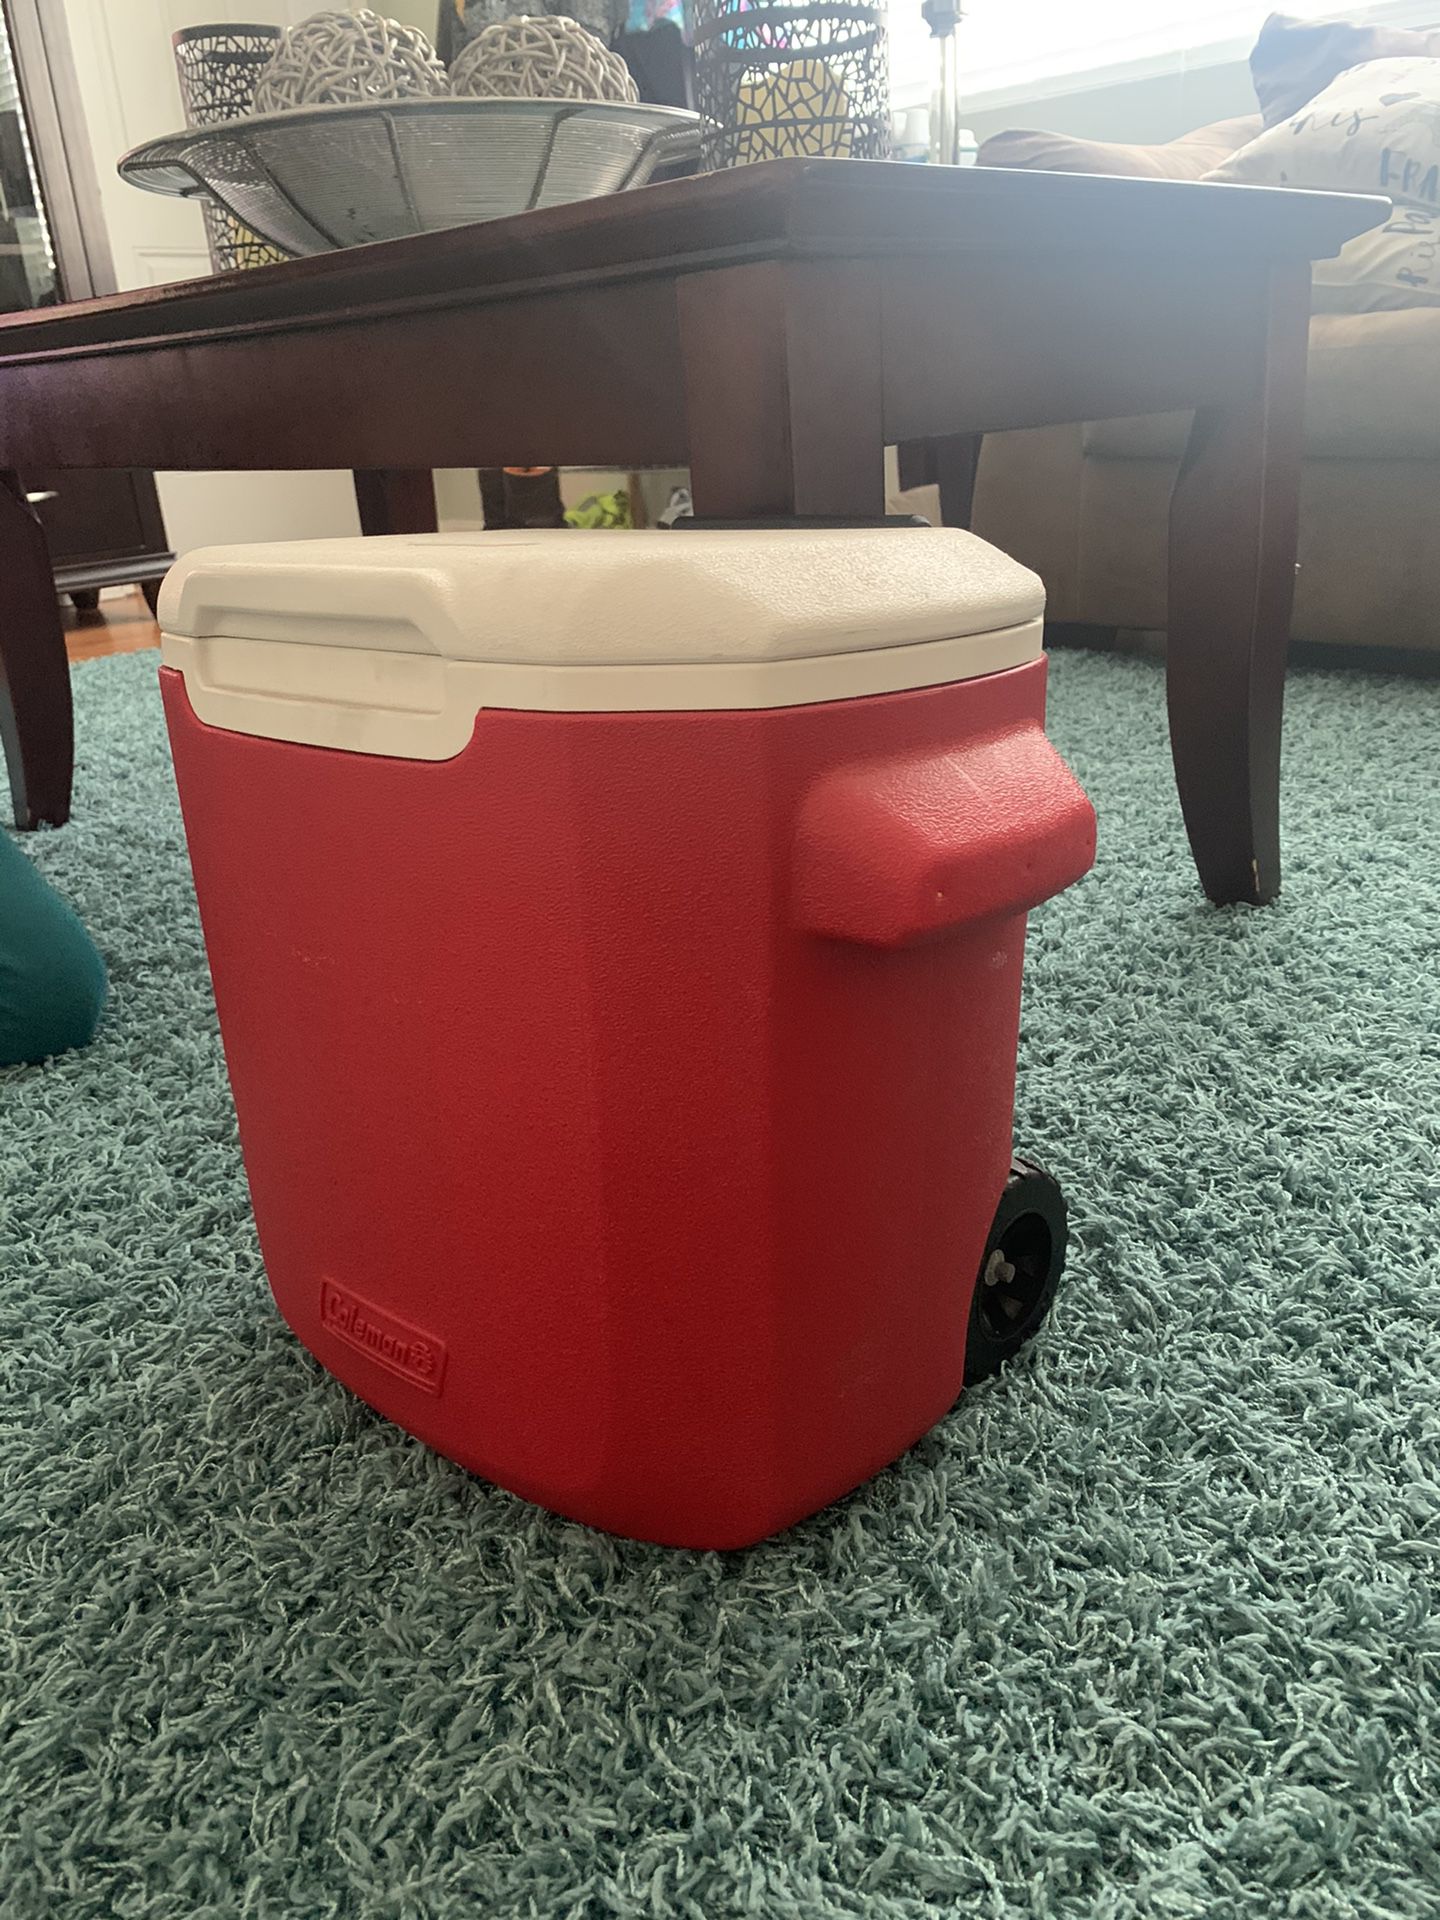 Small Coleman cooler with wheels